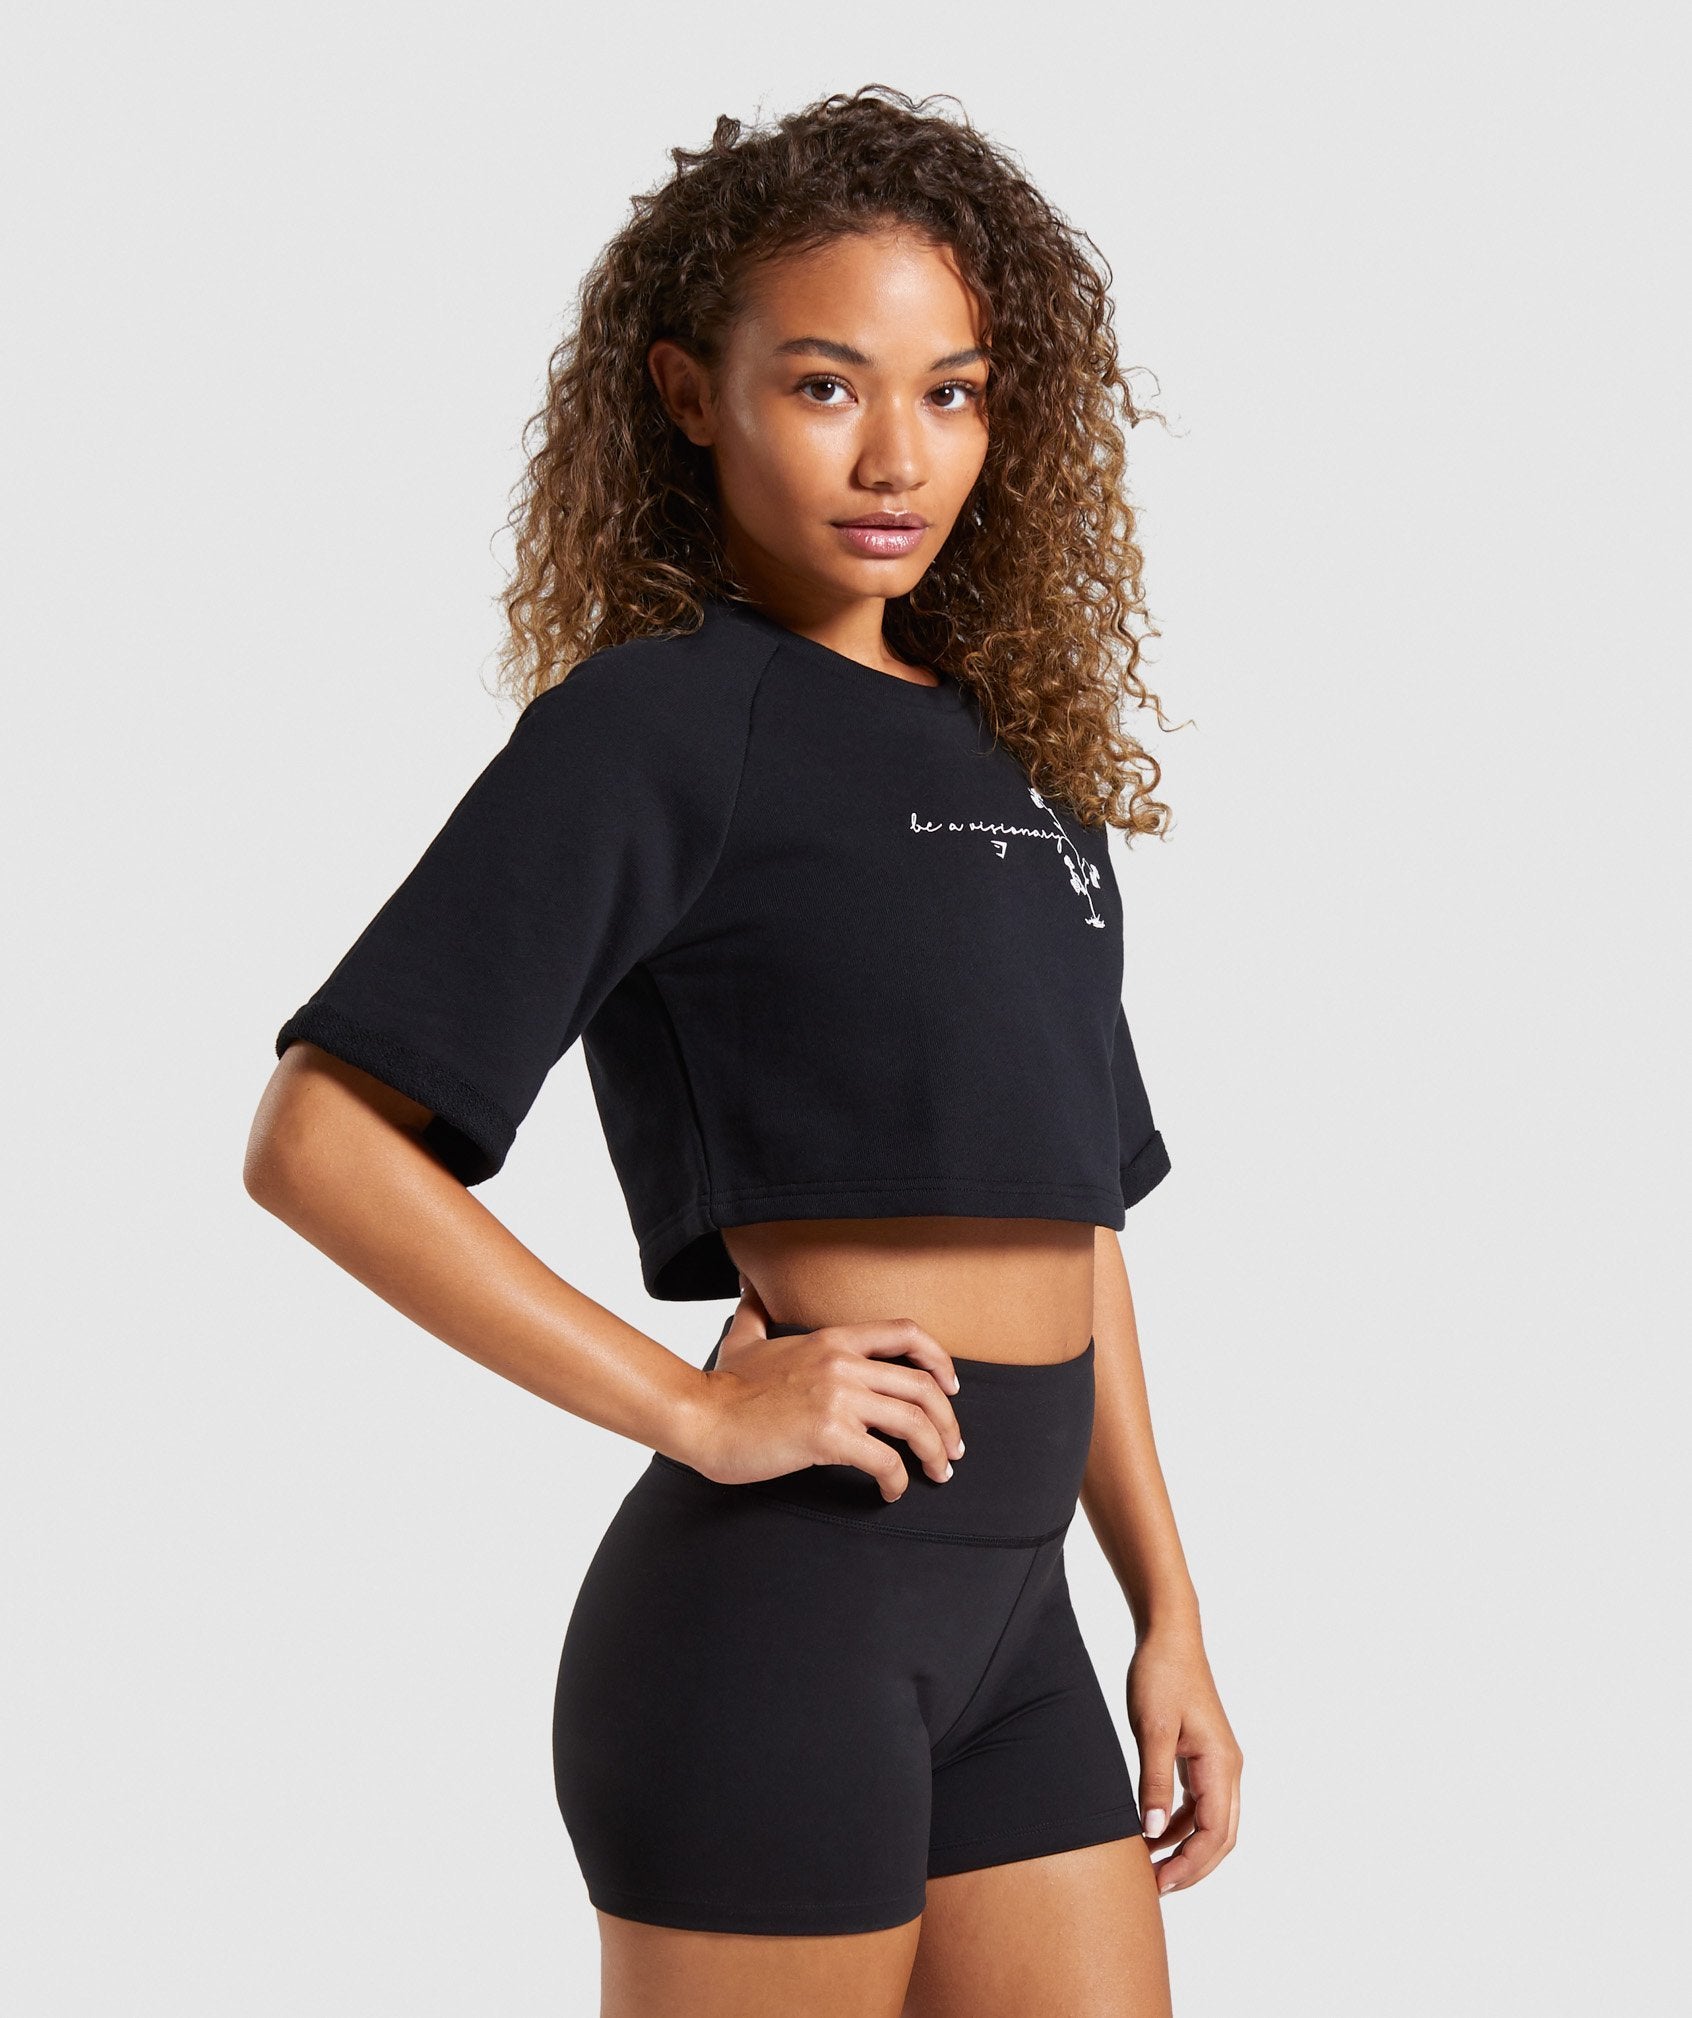 Roots Boxy Cropped Sweater in Black - view 3